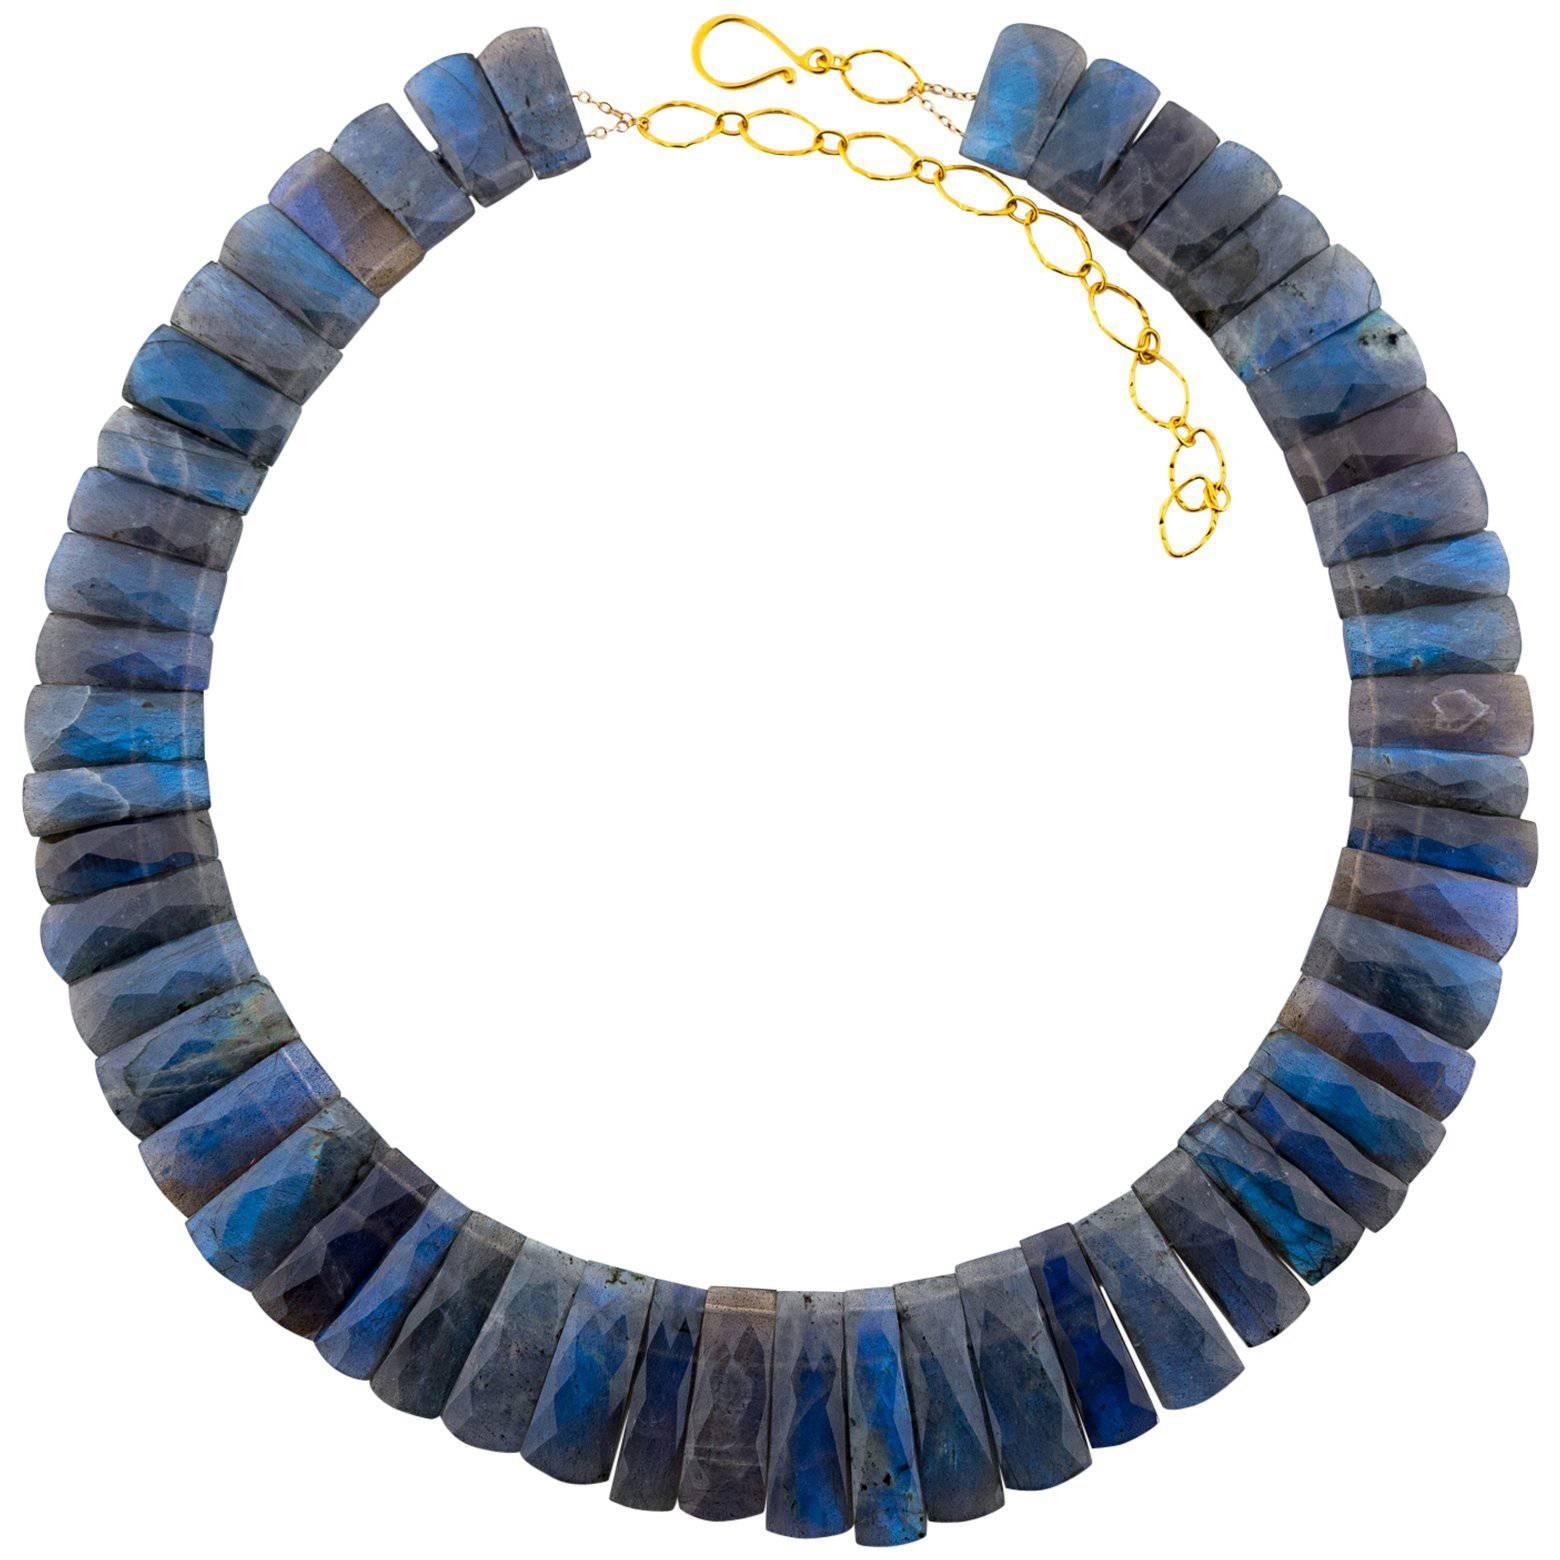 This beautiful Labradorite necklace is stunning and has a great weight to it. The iridescence of it captures the light is so many different angles that the blue tones absolutely glow! Very regal and very elegant! Reminiscent of Cleopatra. The